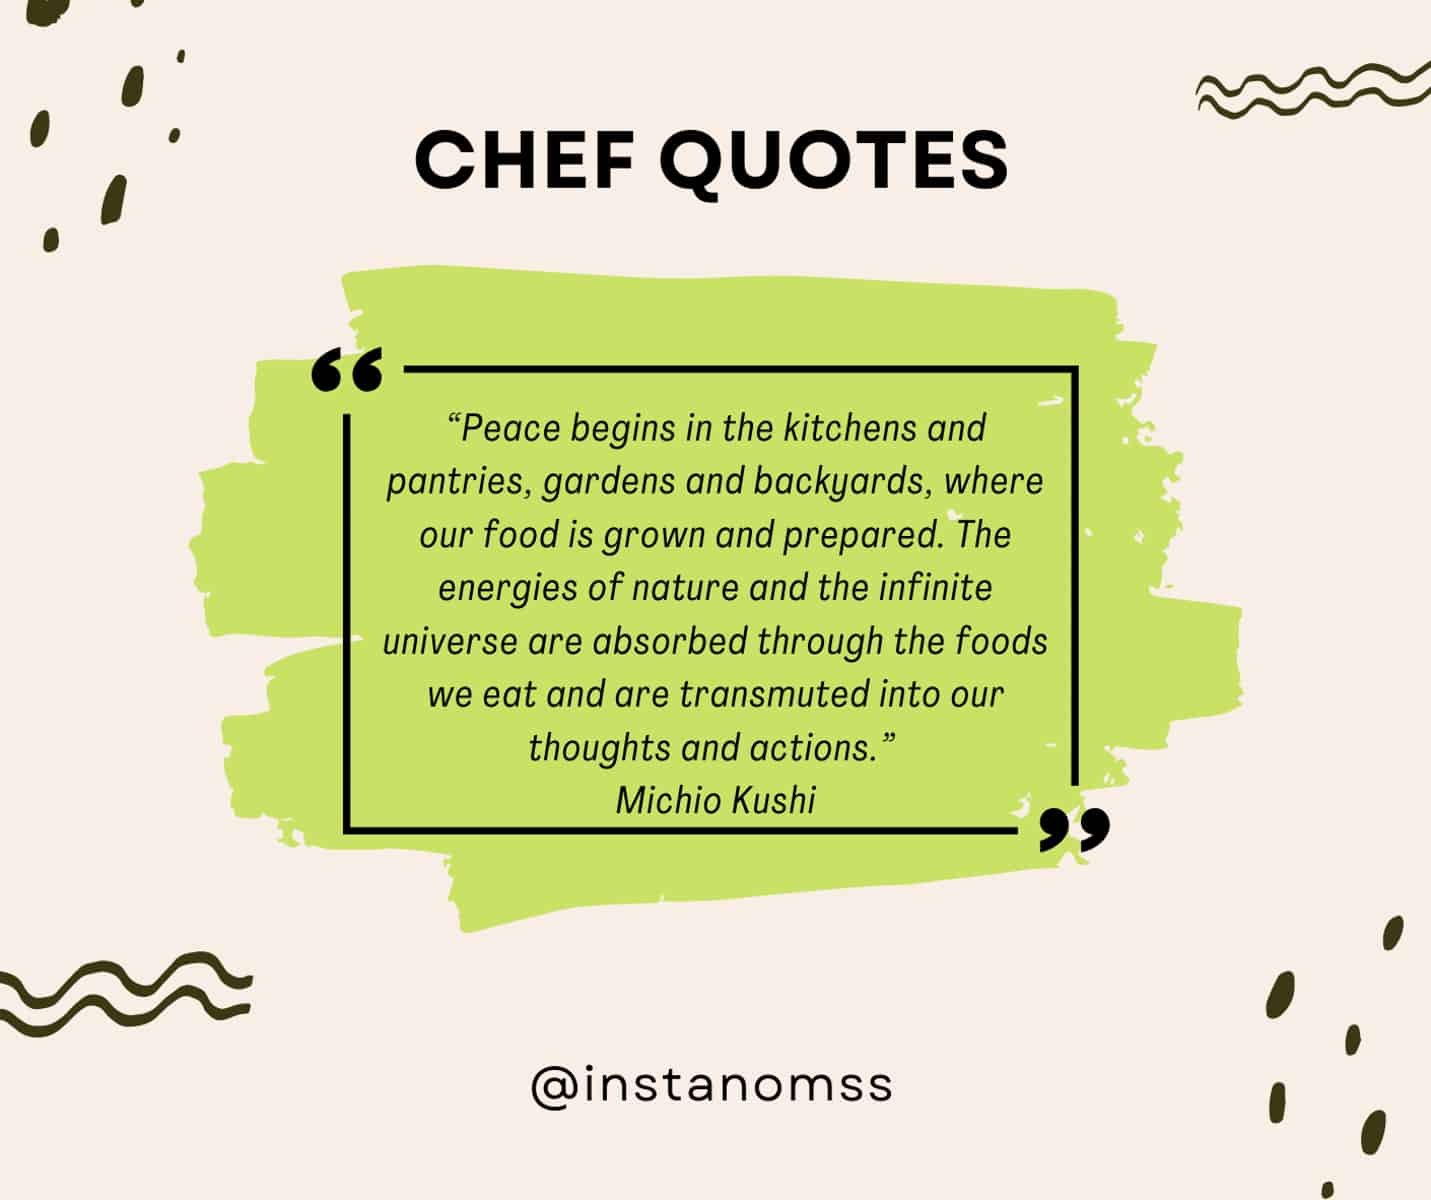 “Peace begins in the kitchens and pantries, gardens and backyards, where our food is grown and prepared. The energies of nature and the infinite universe are absorbed through the foods we eat and are transmuted into our thoughts and actions.” Michio Kushi